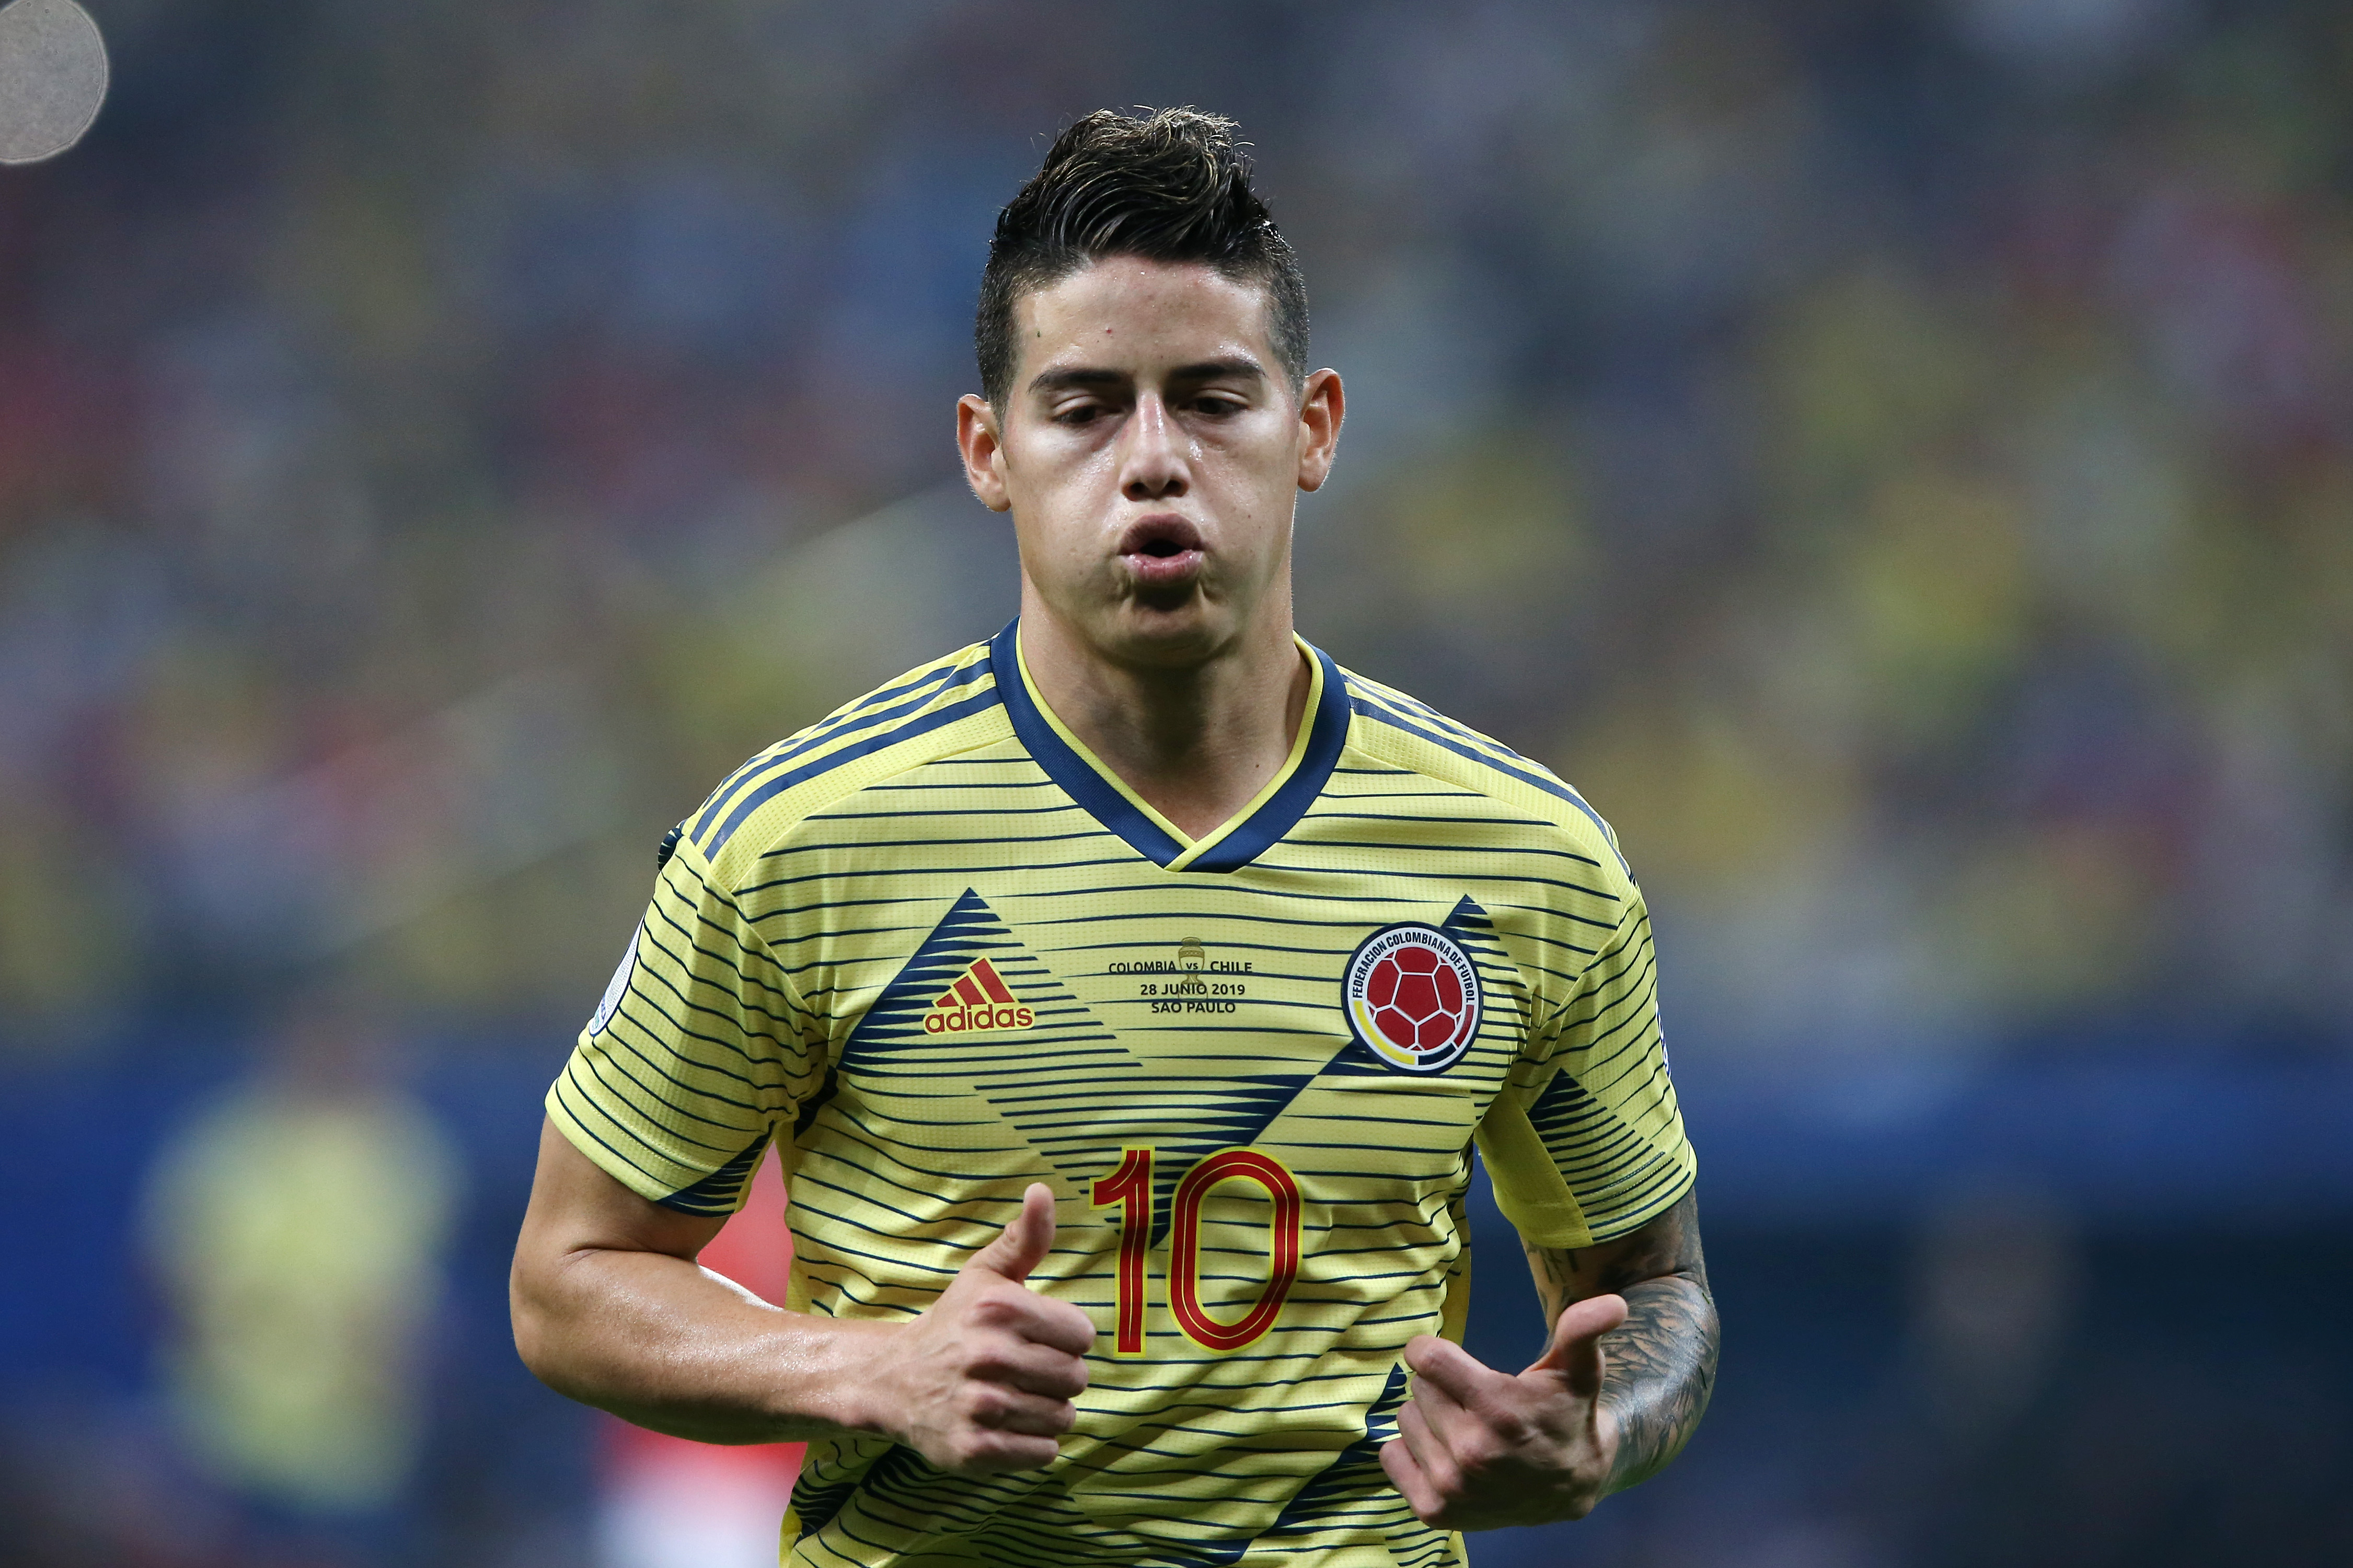 James Rodriguez has reportedly opted of the Colombia squad to concentrate on his Real Madrid career. (Photo by Alexandre Schneider/Getty Images)